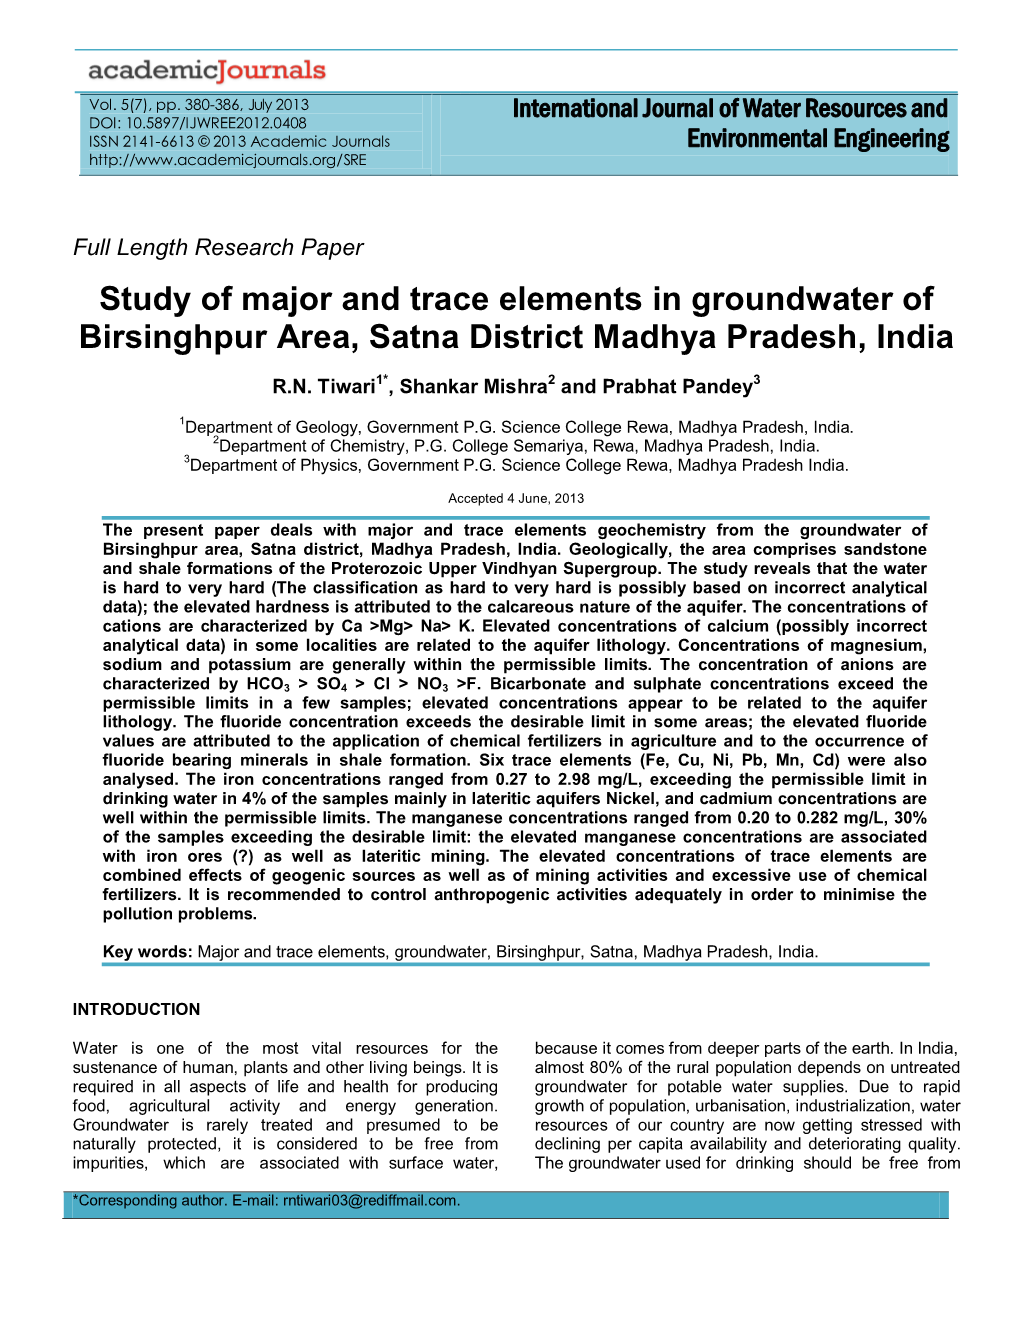 Study of Major and Trace Elements in Groundwater of Birsinghpur Area, Satna District Madhya Pradesh, India